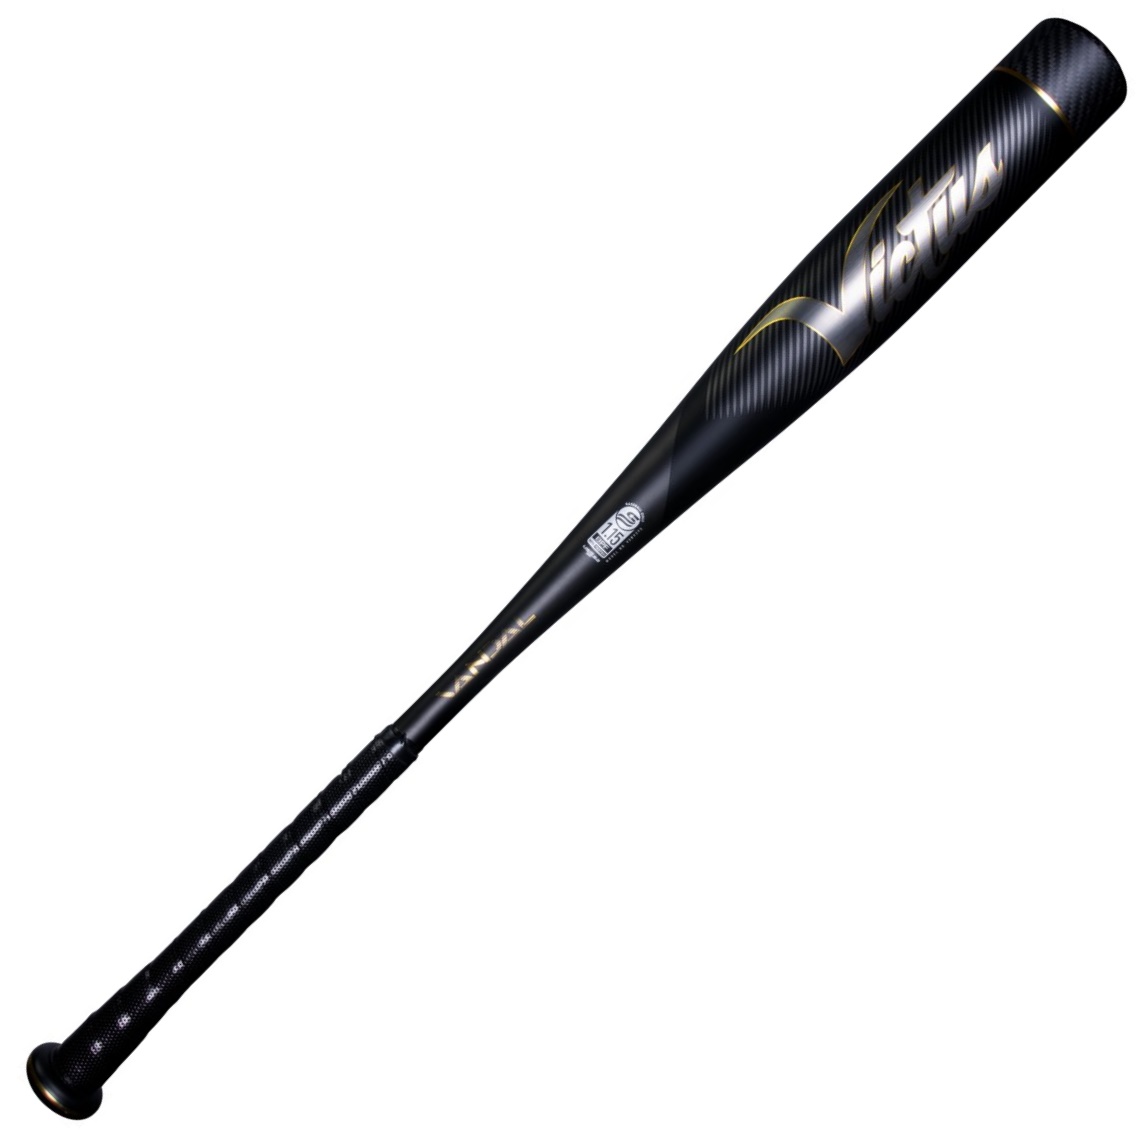 victus-vandal-2-bbcor-2022-baseball-bat-32-inch-29-oz VCBV2-3229 Victus 840078703591 <p>In baseball speed is everything.<br /> <br />That’s why Victus designed the